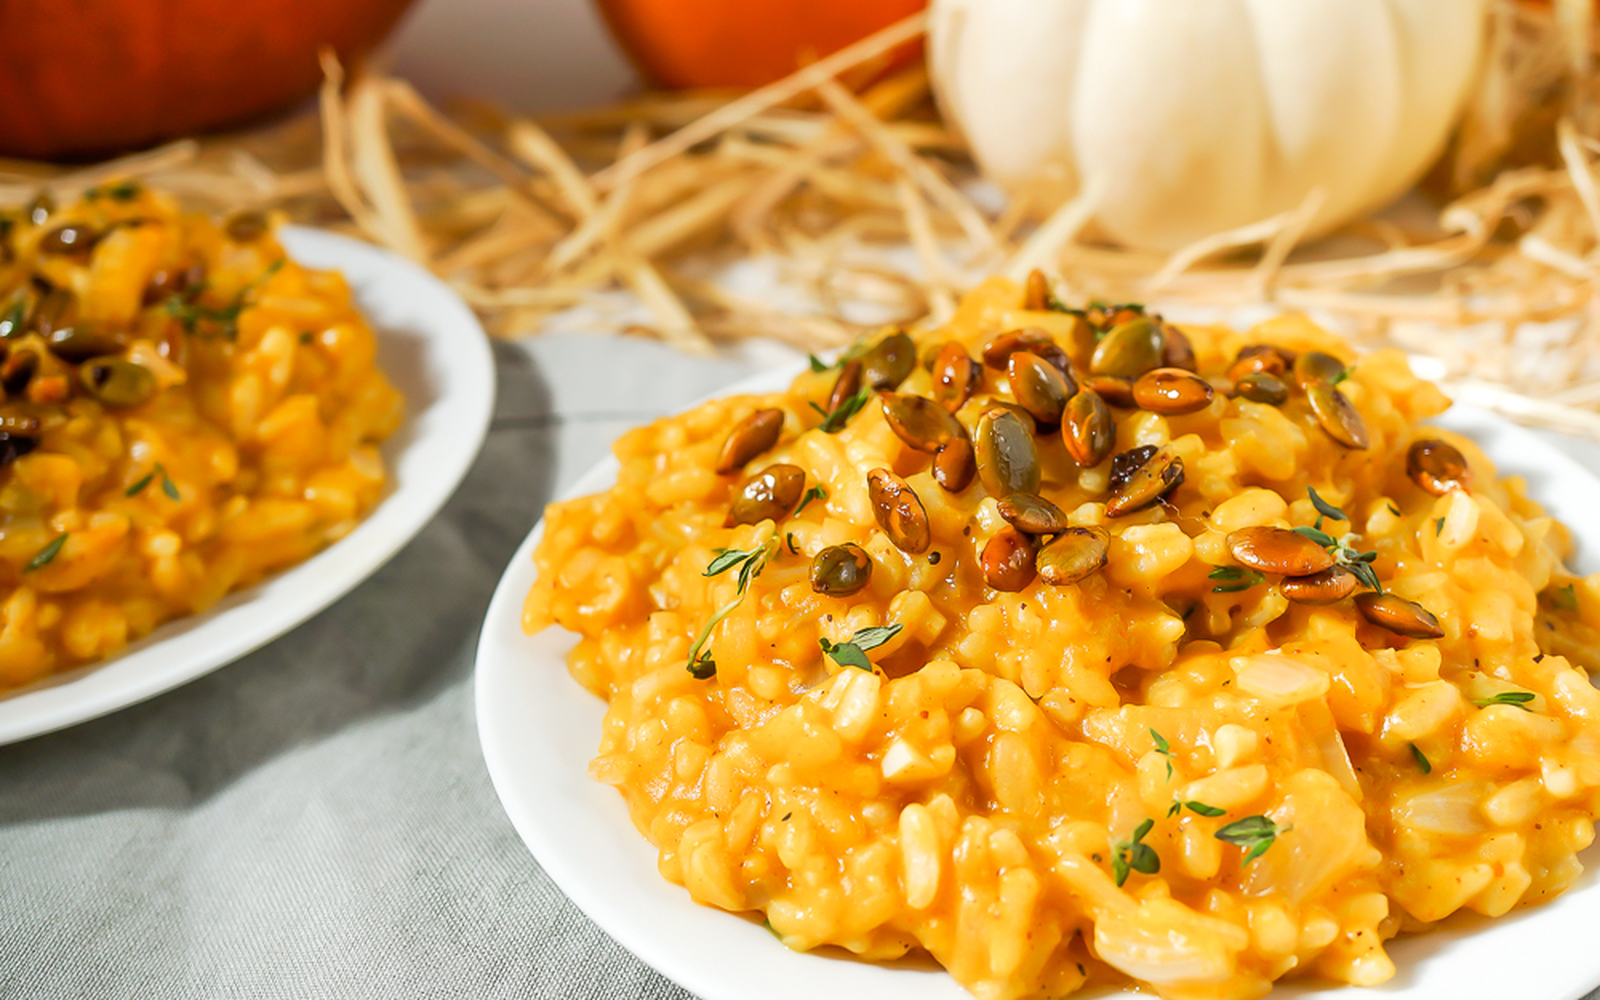 Creamy Pumpkin Risotto with Sweet and Spicy Roasted Pepitas [Vegan, Gluten-Free]